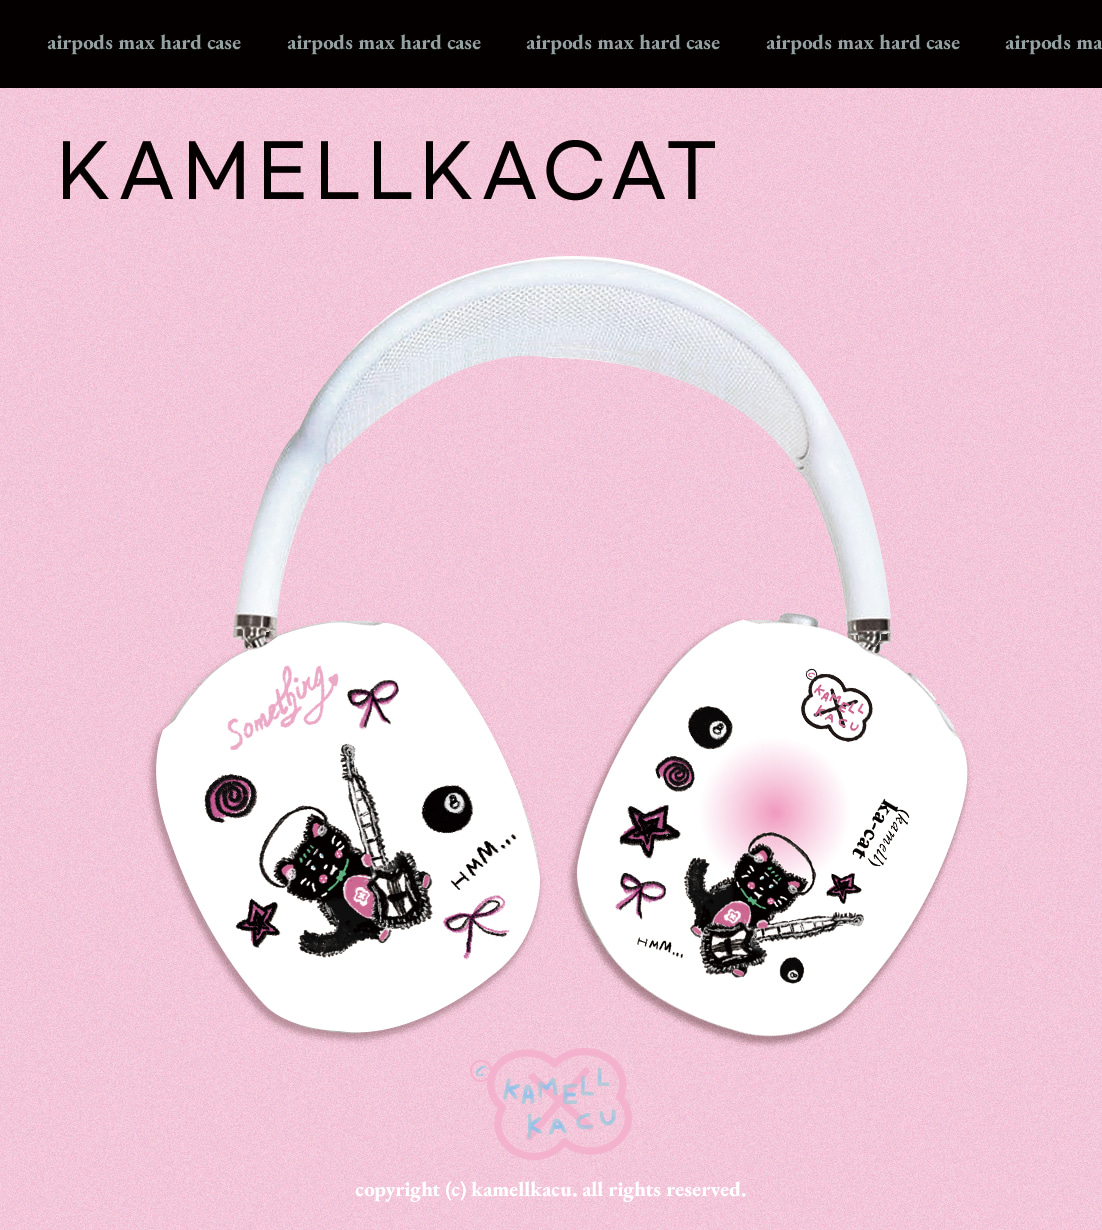 I am lazy (kamell) kacat.... airpods max hard case